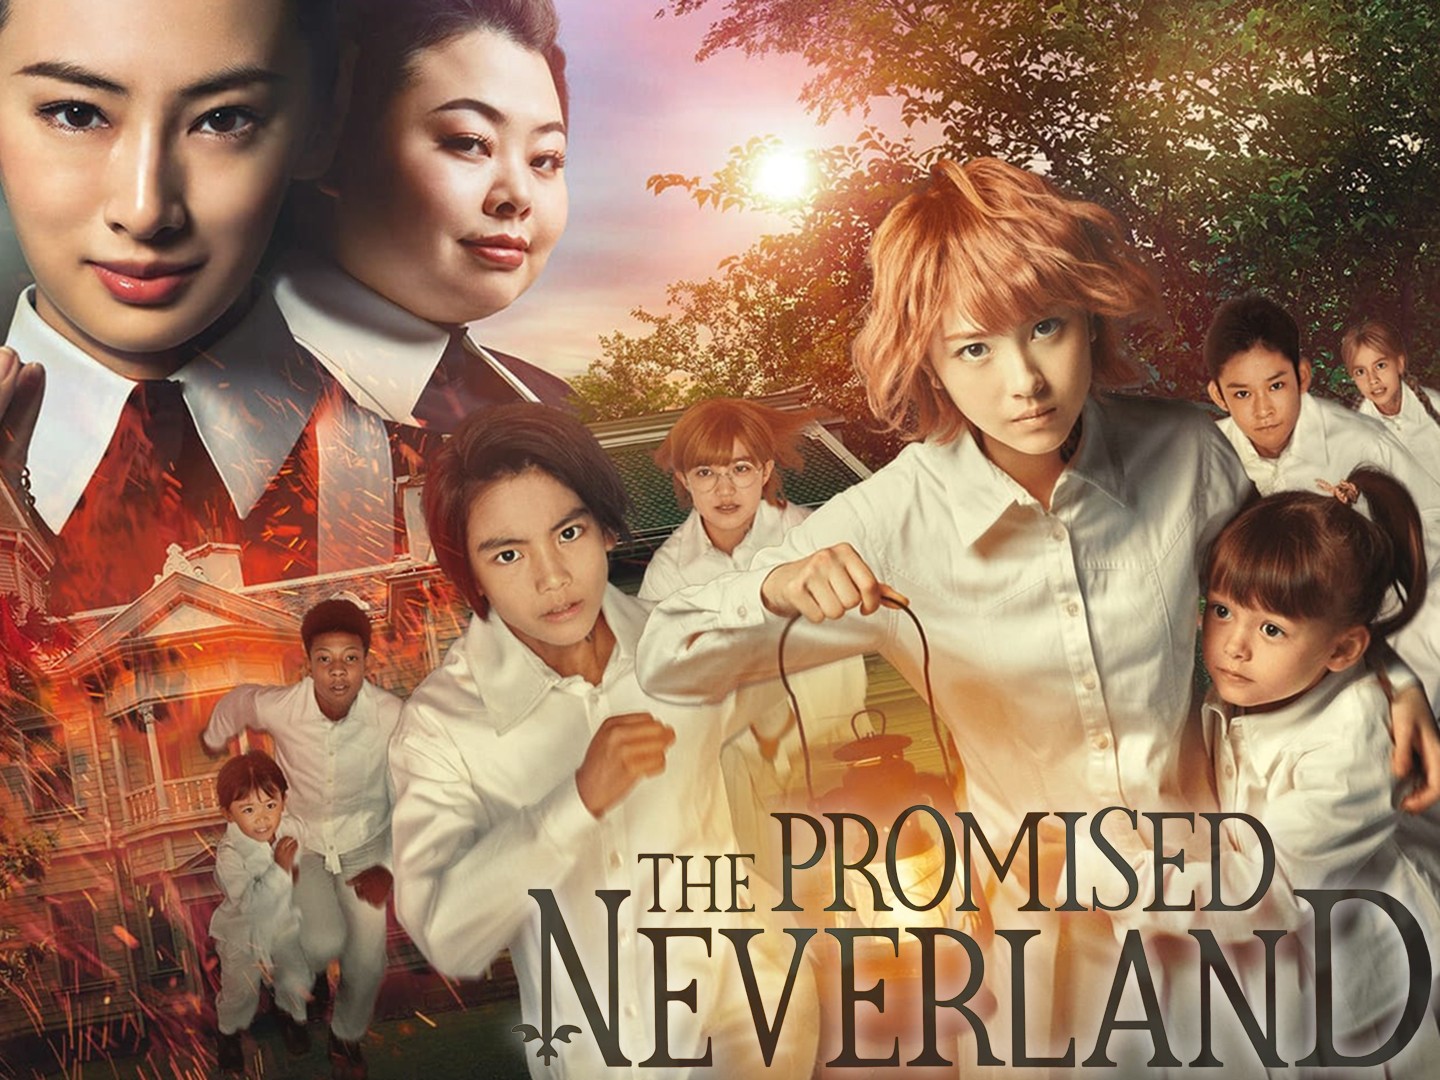 The Promised Neverland Live Action Movie Releases Trailer!